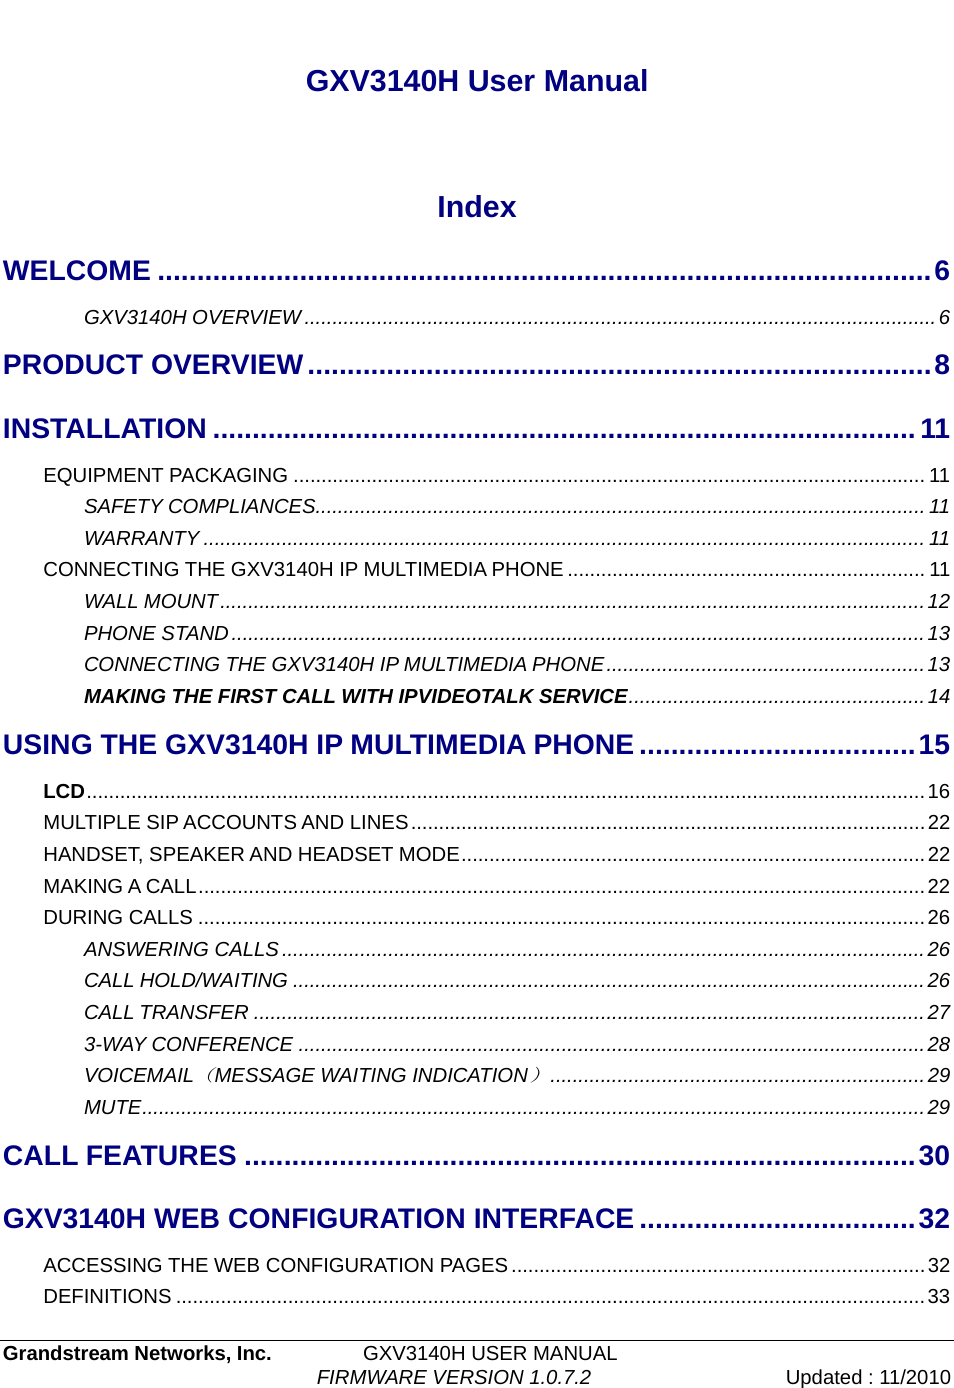   Grandstream Networks, Inc.         GXV3140H USER MANUAL                                  FIRMWARE VERSION 1.0.7.2 Updated : 11/2010    GXV3140H User Manual  Index WELCOME ..................................................................................................6 GXV3140H OVERVIEW.................................................................................................................6 PRODUCT OVERVIEW...............................................................................8 INSTALLATION .........................................................................................11 EQUIPMENT PACKAGING ................................................................................................................. 11 SAFETY COMPLIANCES.............................................................................................................11 WARRANTY ................................................................................................................................. 11 CONNECTING THE GXV3140H IP MULTIMEDIA PHONE ................................................................ 11 WALL MOUNT..............................................................................................................................12 PHONE STAND............................................................................................................................13 CONNECTING THE GXV3140H IP MULTIMEDIA PHONE.........................................................13 MAKING THE FIRST CALL WITH IPVIDEOTALK SERVICE.....................................................14 USING THE GXV3140H IP MULTIMEDIA PHONE ...................................15 LCD......................................................................................................................................................16 MULTIPLE SIP ACCOUNTS AND LINES............................................................................................22 HANDSET, SPEAKER AND HEADSET MODE...................................................................................22 MAKING A CALL..................................................................................................................................22 DURING CALLS ..................................................................................................................................26 ANSWERING CALLS...................................................................................................................26 CALL HOLD/WAITING .................................................................................................................26 CALL TRANSFER ........................................................................................................................27 3-WAY CONFERENCE ................................................................................................................28 VOICEMAIL（MESSAGE WAITING INDICATION）...................................................................29 MUTE............................................................................................................................................29 CALL FEATURES .....................................................................................30 GXV3140H WEB CONFIGURATION INTERFACE ...................................32 ACCESSING THE WEB CONFIGURATION PAGES..........................................................................32 DEFINITIONS ......................................................................................................................................33 